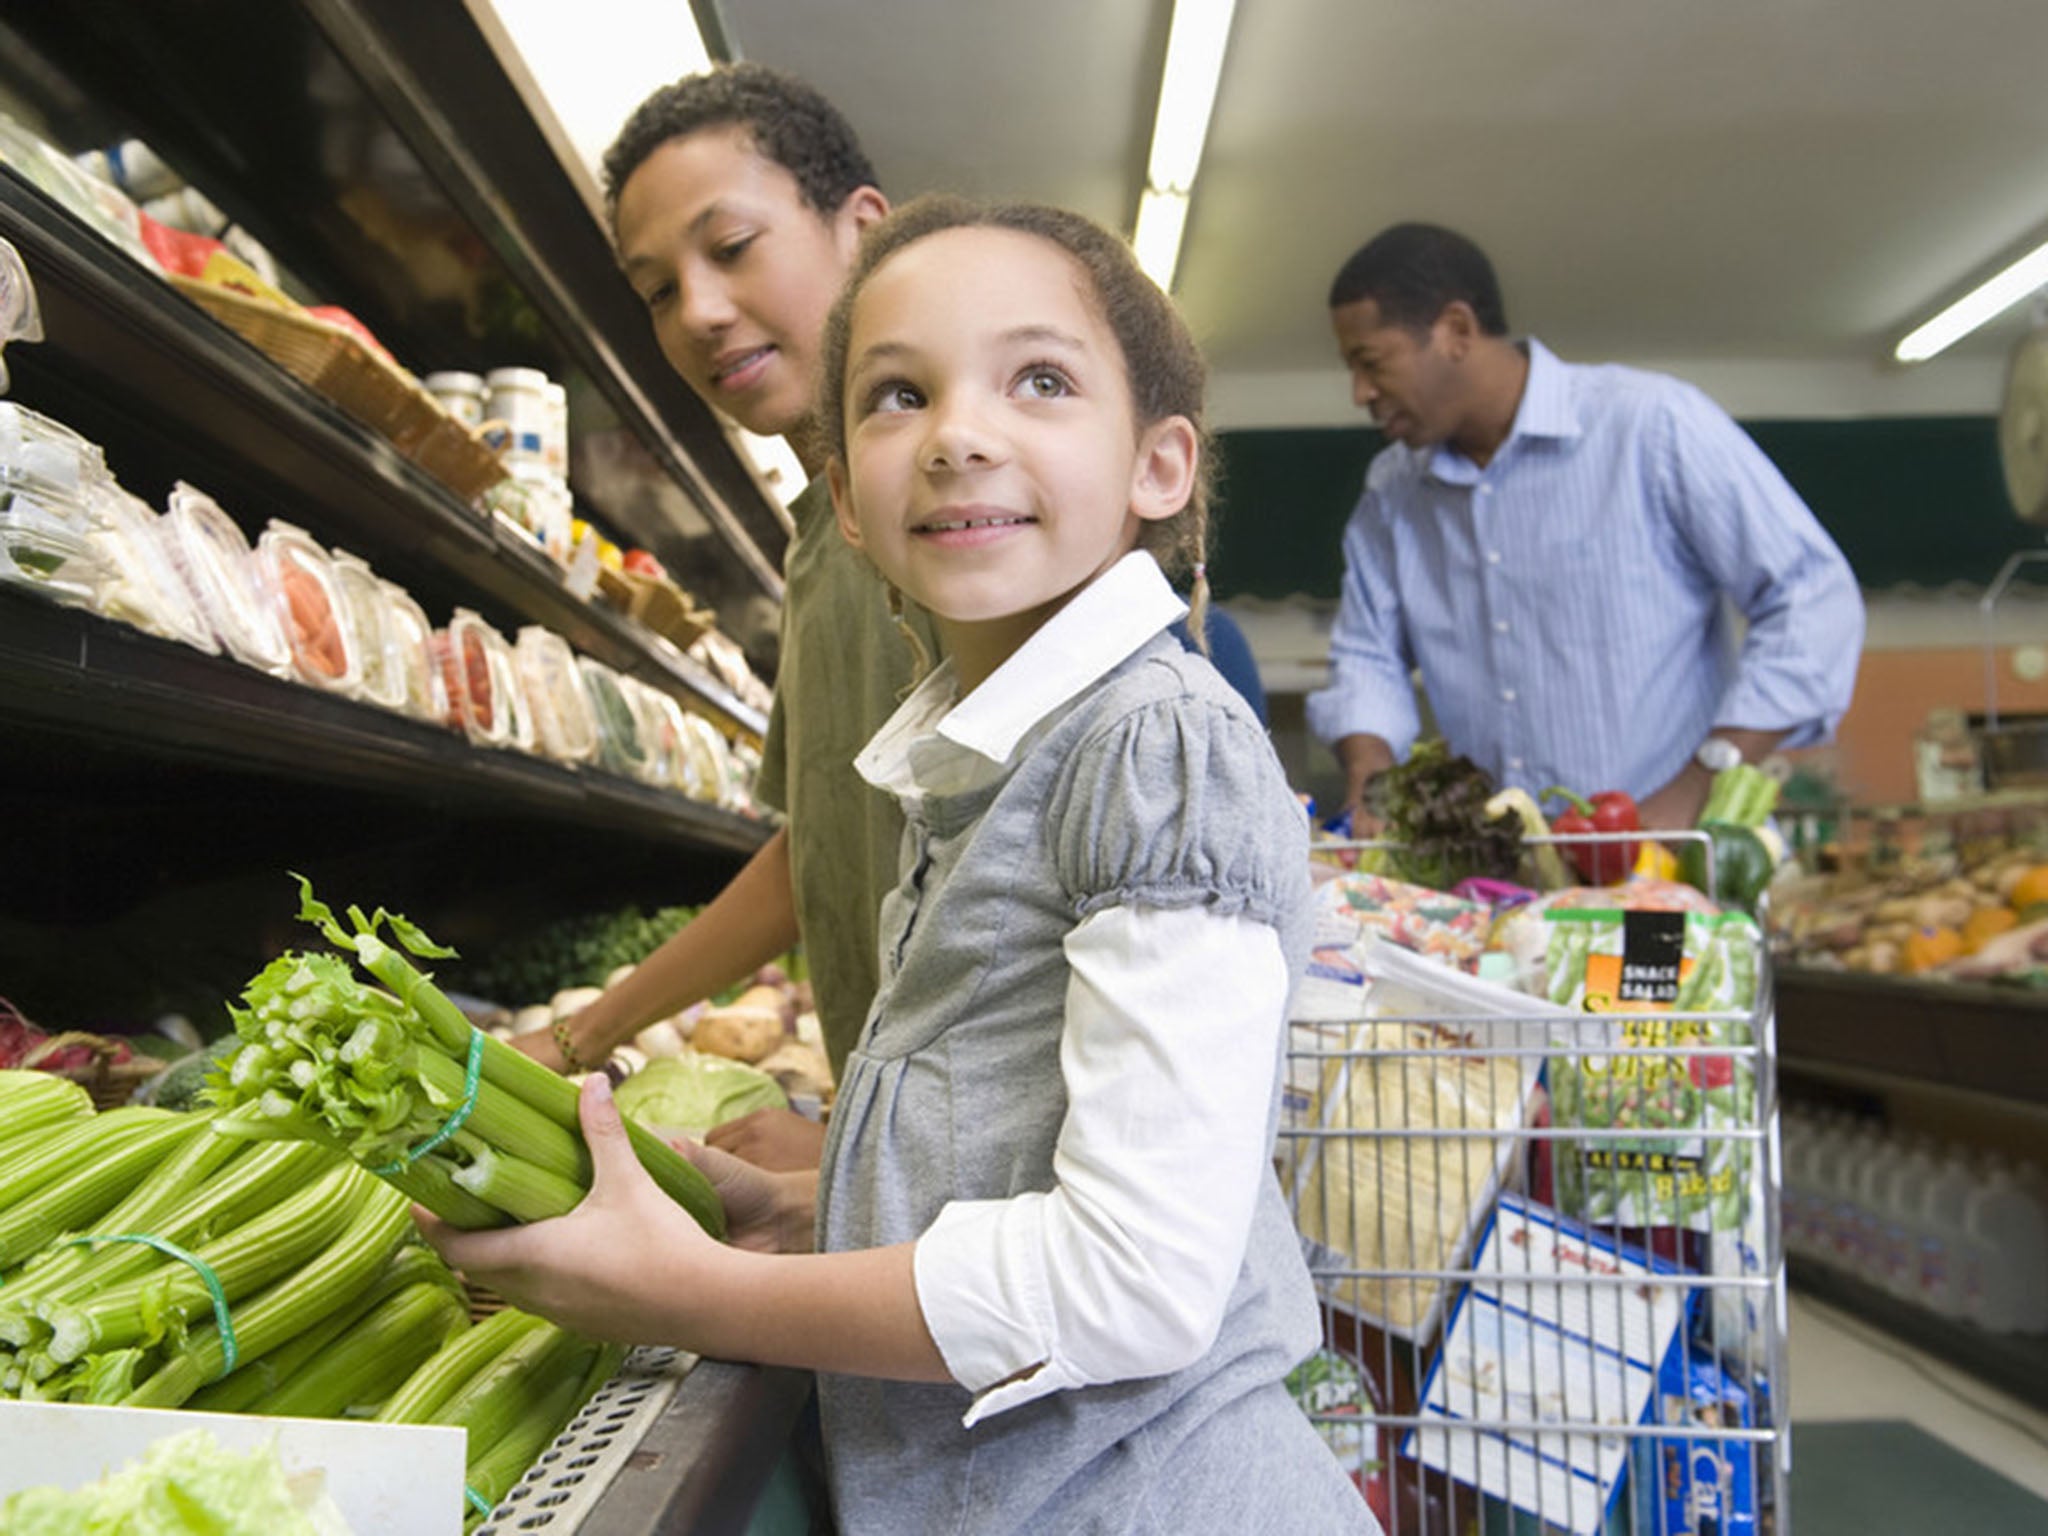 A good diet is key for a child’s well-being